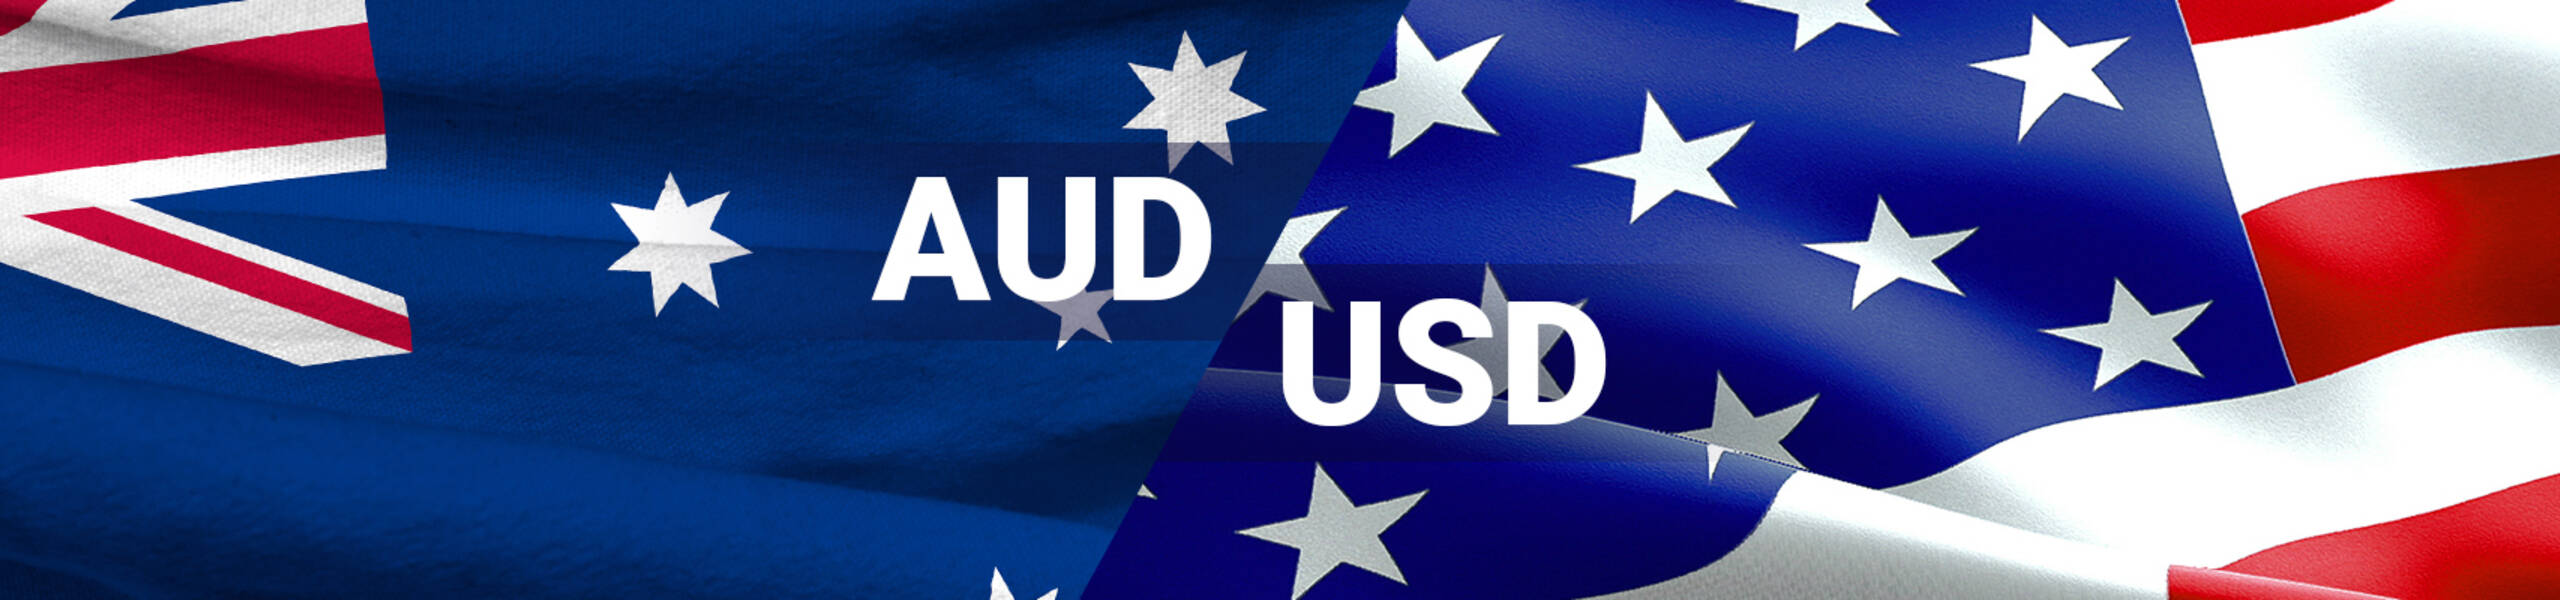 AUD/USD targeting levels below 0.7600 in the short-term